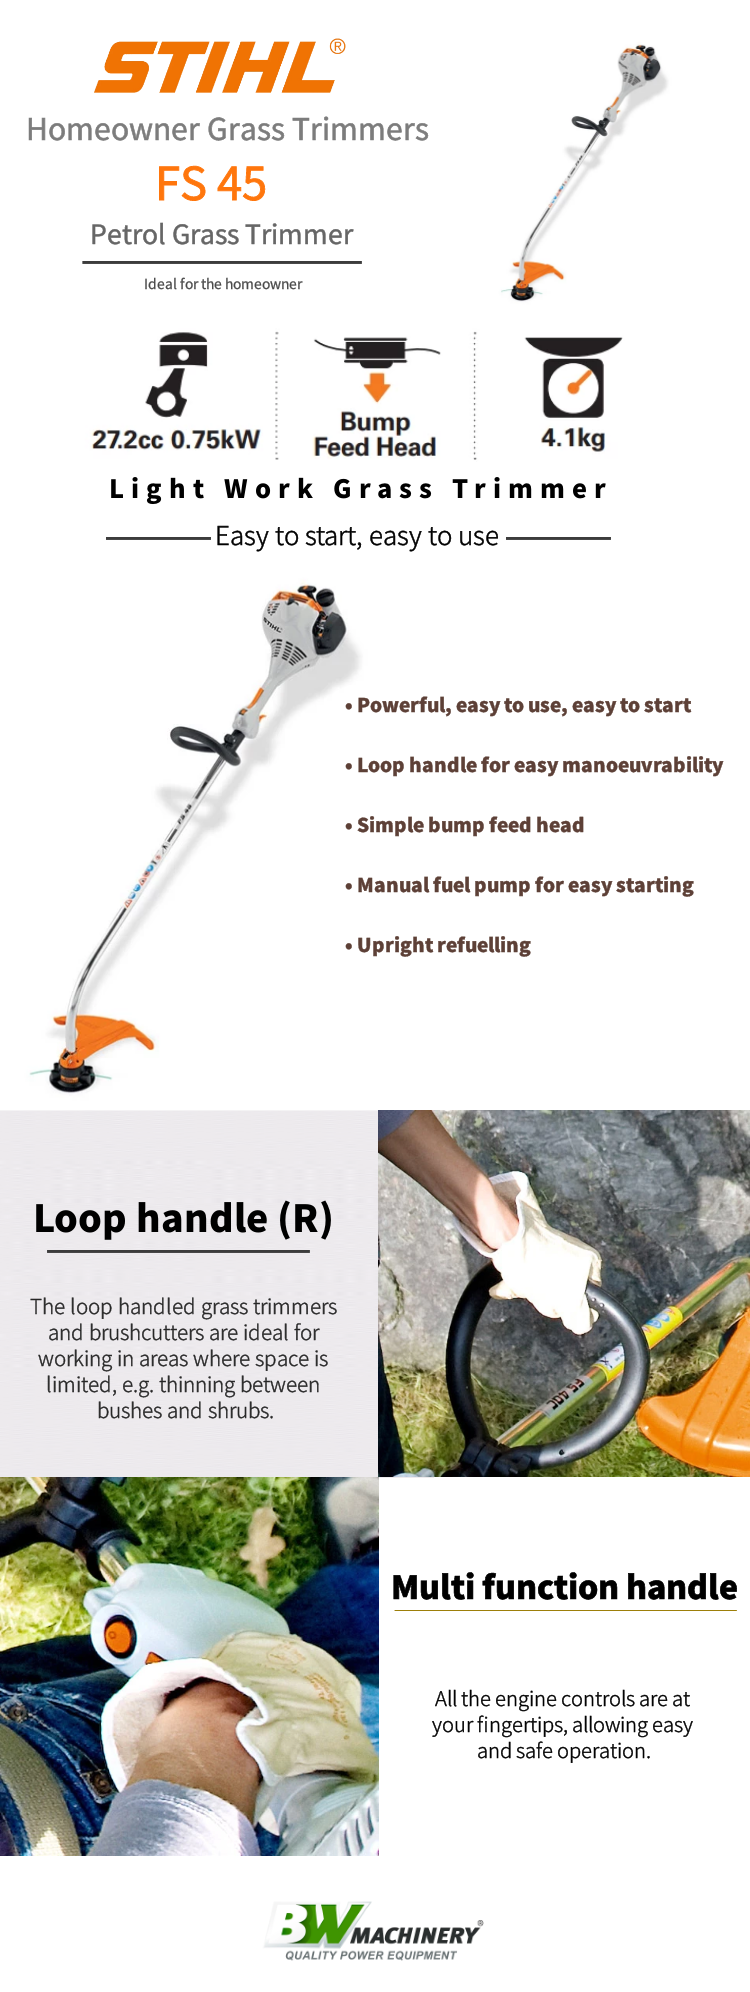 line trimmer afterpay